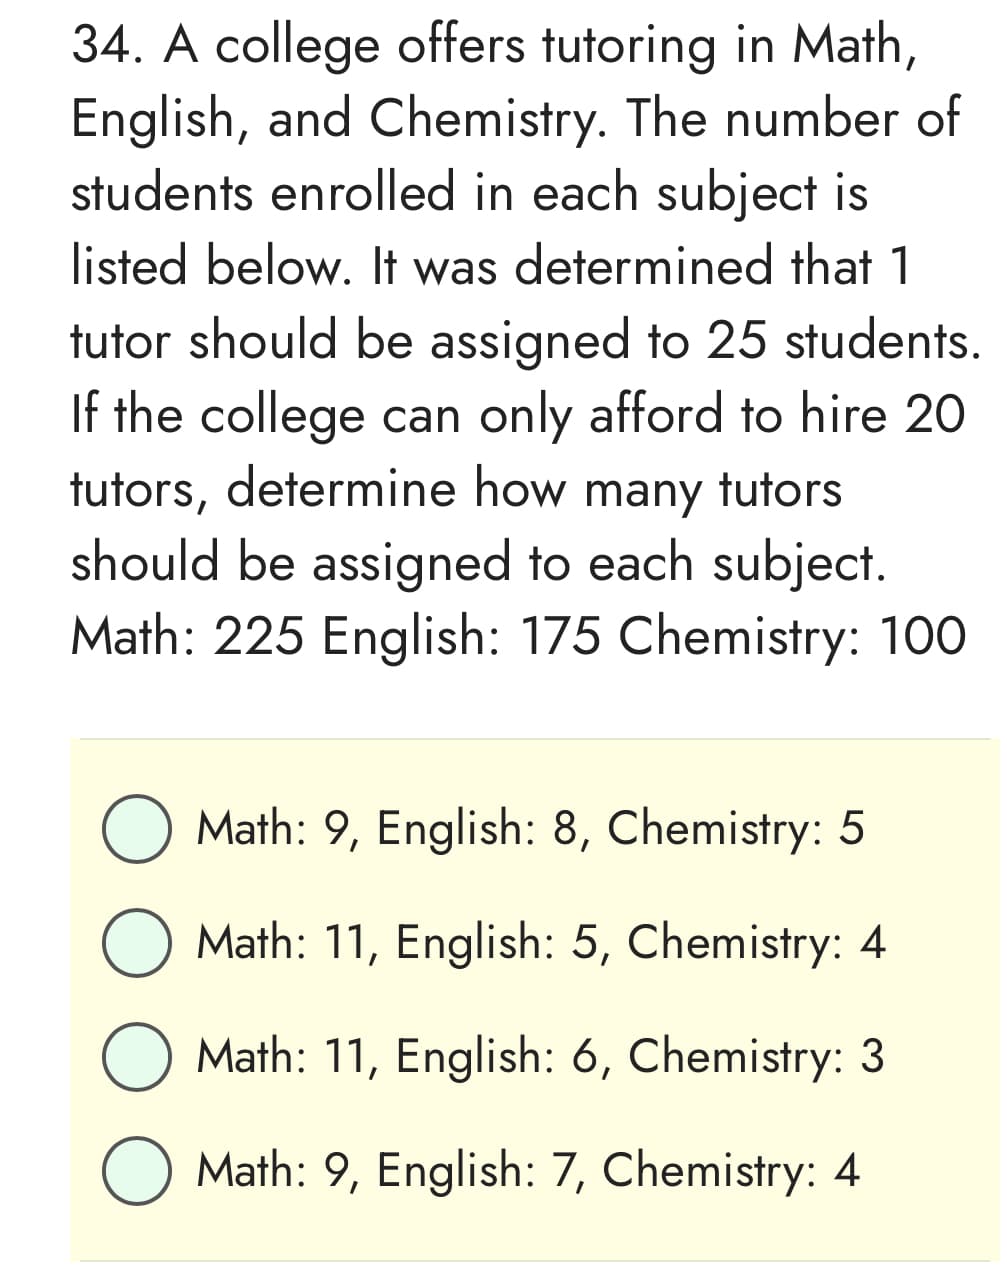 34. A college offers tutoring in Math,
English, and Chemistry. The number of
students enrolled in each subject is
listed below. It was determined that 1
tutor should be assigned to 25 students.
If the college can only afford to hire 20
tutors, determine how many tutors
should be assigned to each subject.
Math: 225 English: 175 Chemistry: 100
O Math: 9, English: 8, Chemistry: 5
O Math: 11, English: 5, Chemistry: 4
Math: 11, English: 6, Chemistry: 3
O Math: 9, English: 7, Chemistry: 4